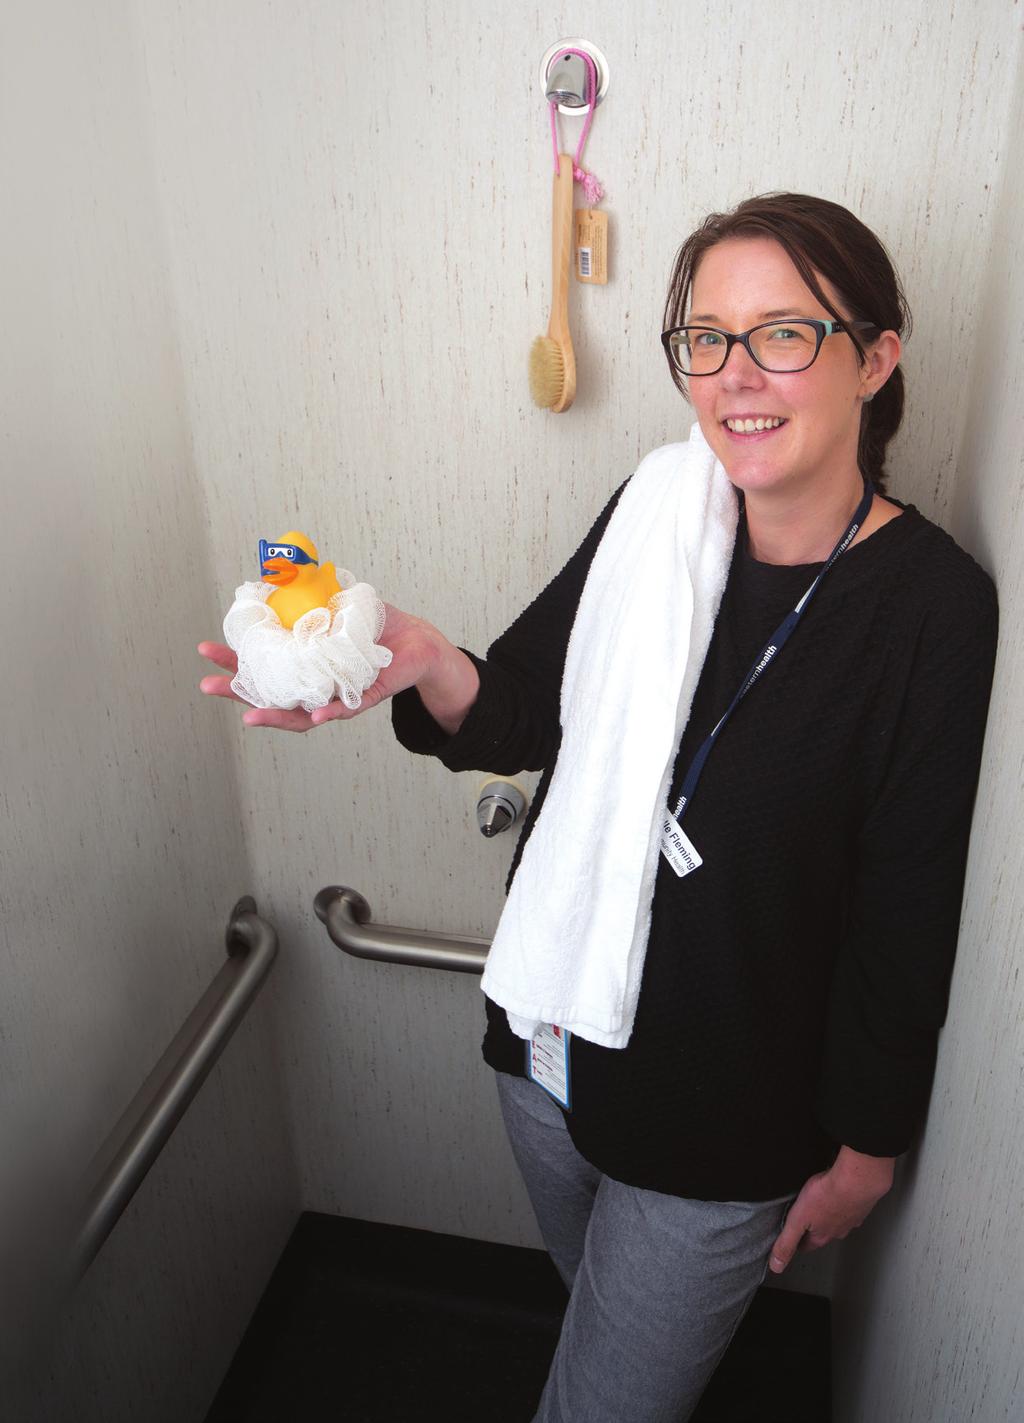 SHOWER ACCESS HELPS HOMELESS HOMELESSNESS HELP: Eastern Health Community Health Manager Michelle Fleming previews the community shower at Healesville Hospital and Yarra Valley Health.